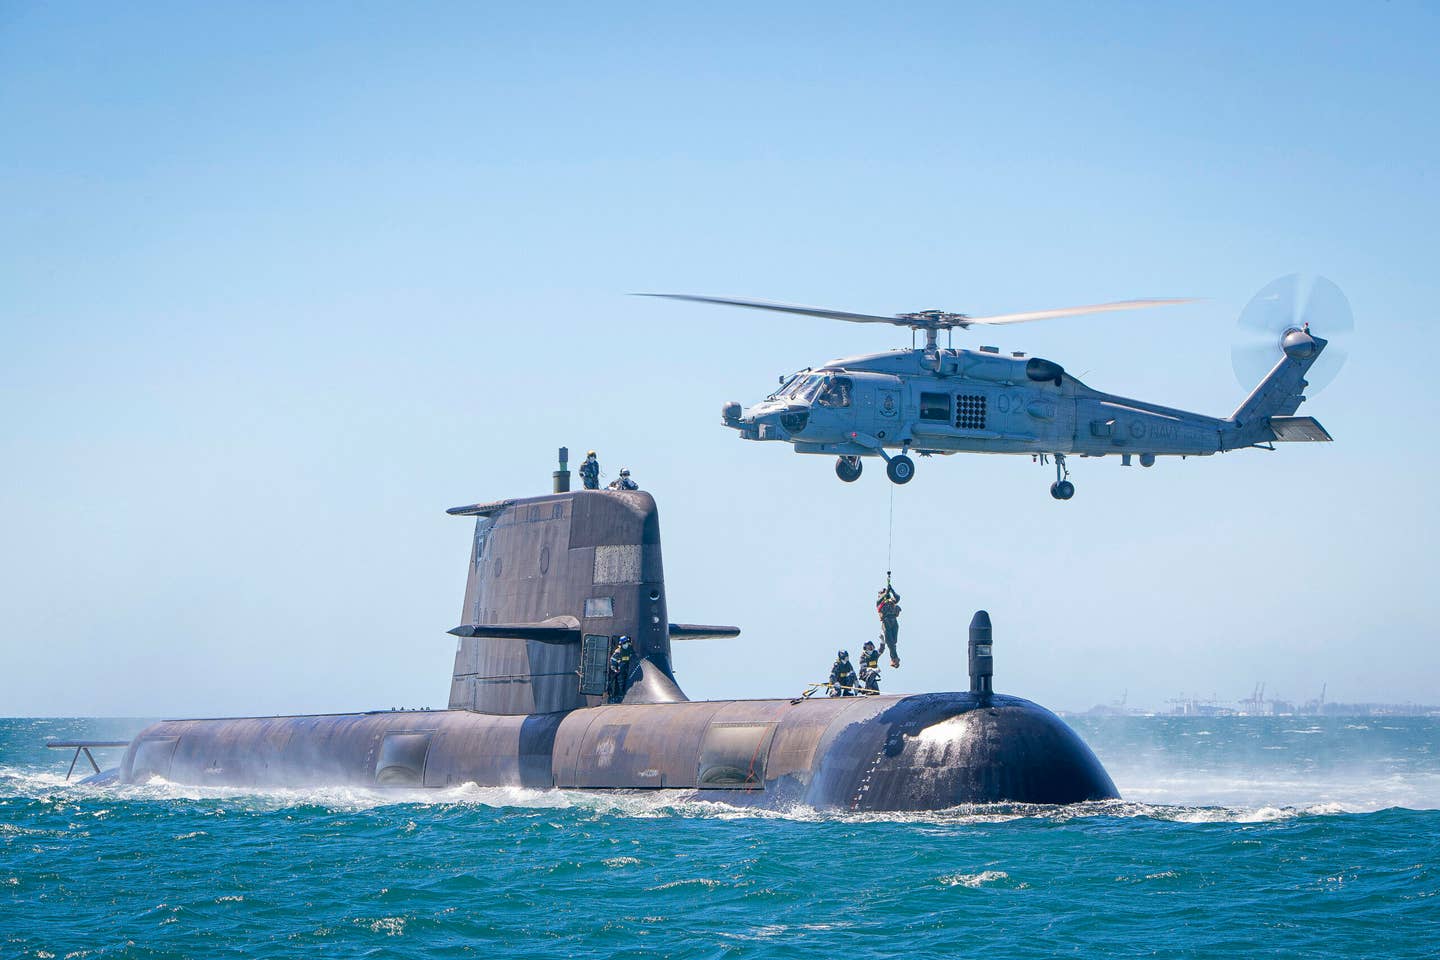 The <em>Collins</em> class submarine HMAS <em>Rankin</em> conducts helicopter transfers in Cockburn Sound, Western Australia, as part of training assessments to ensure the boat is ready to deploy. <em>Australian Department of Defense</em>